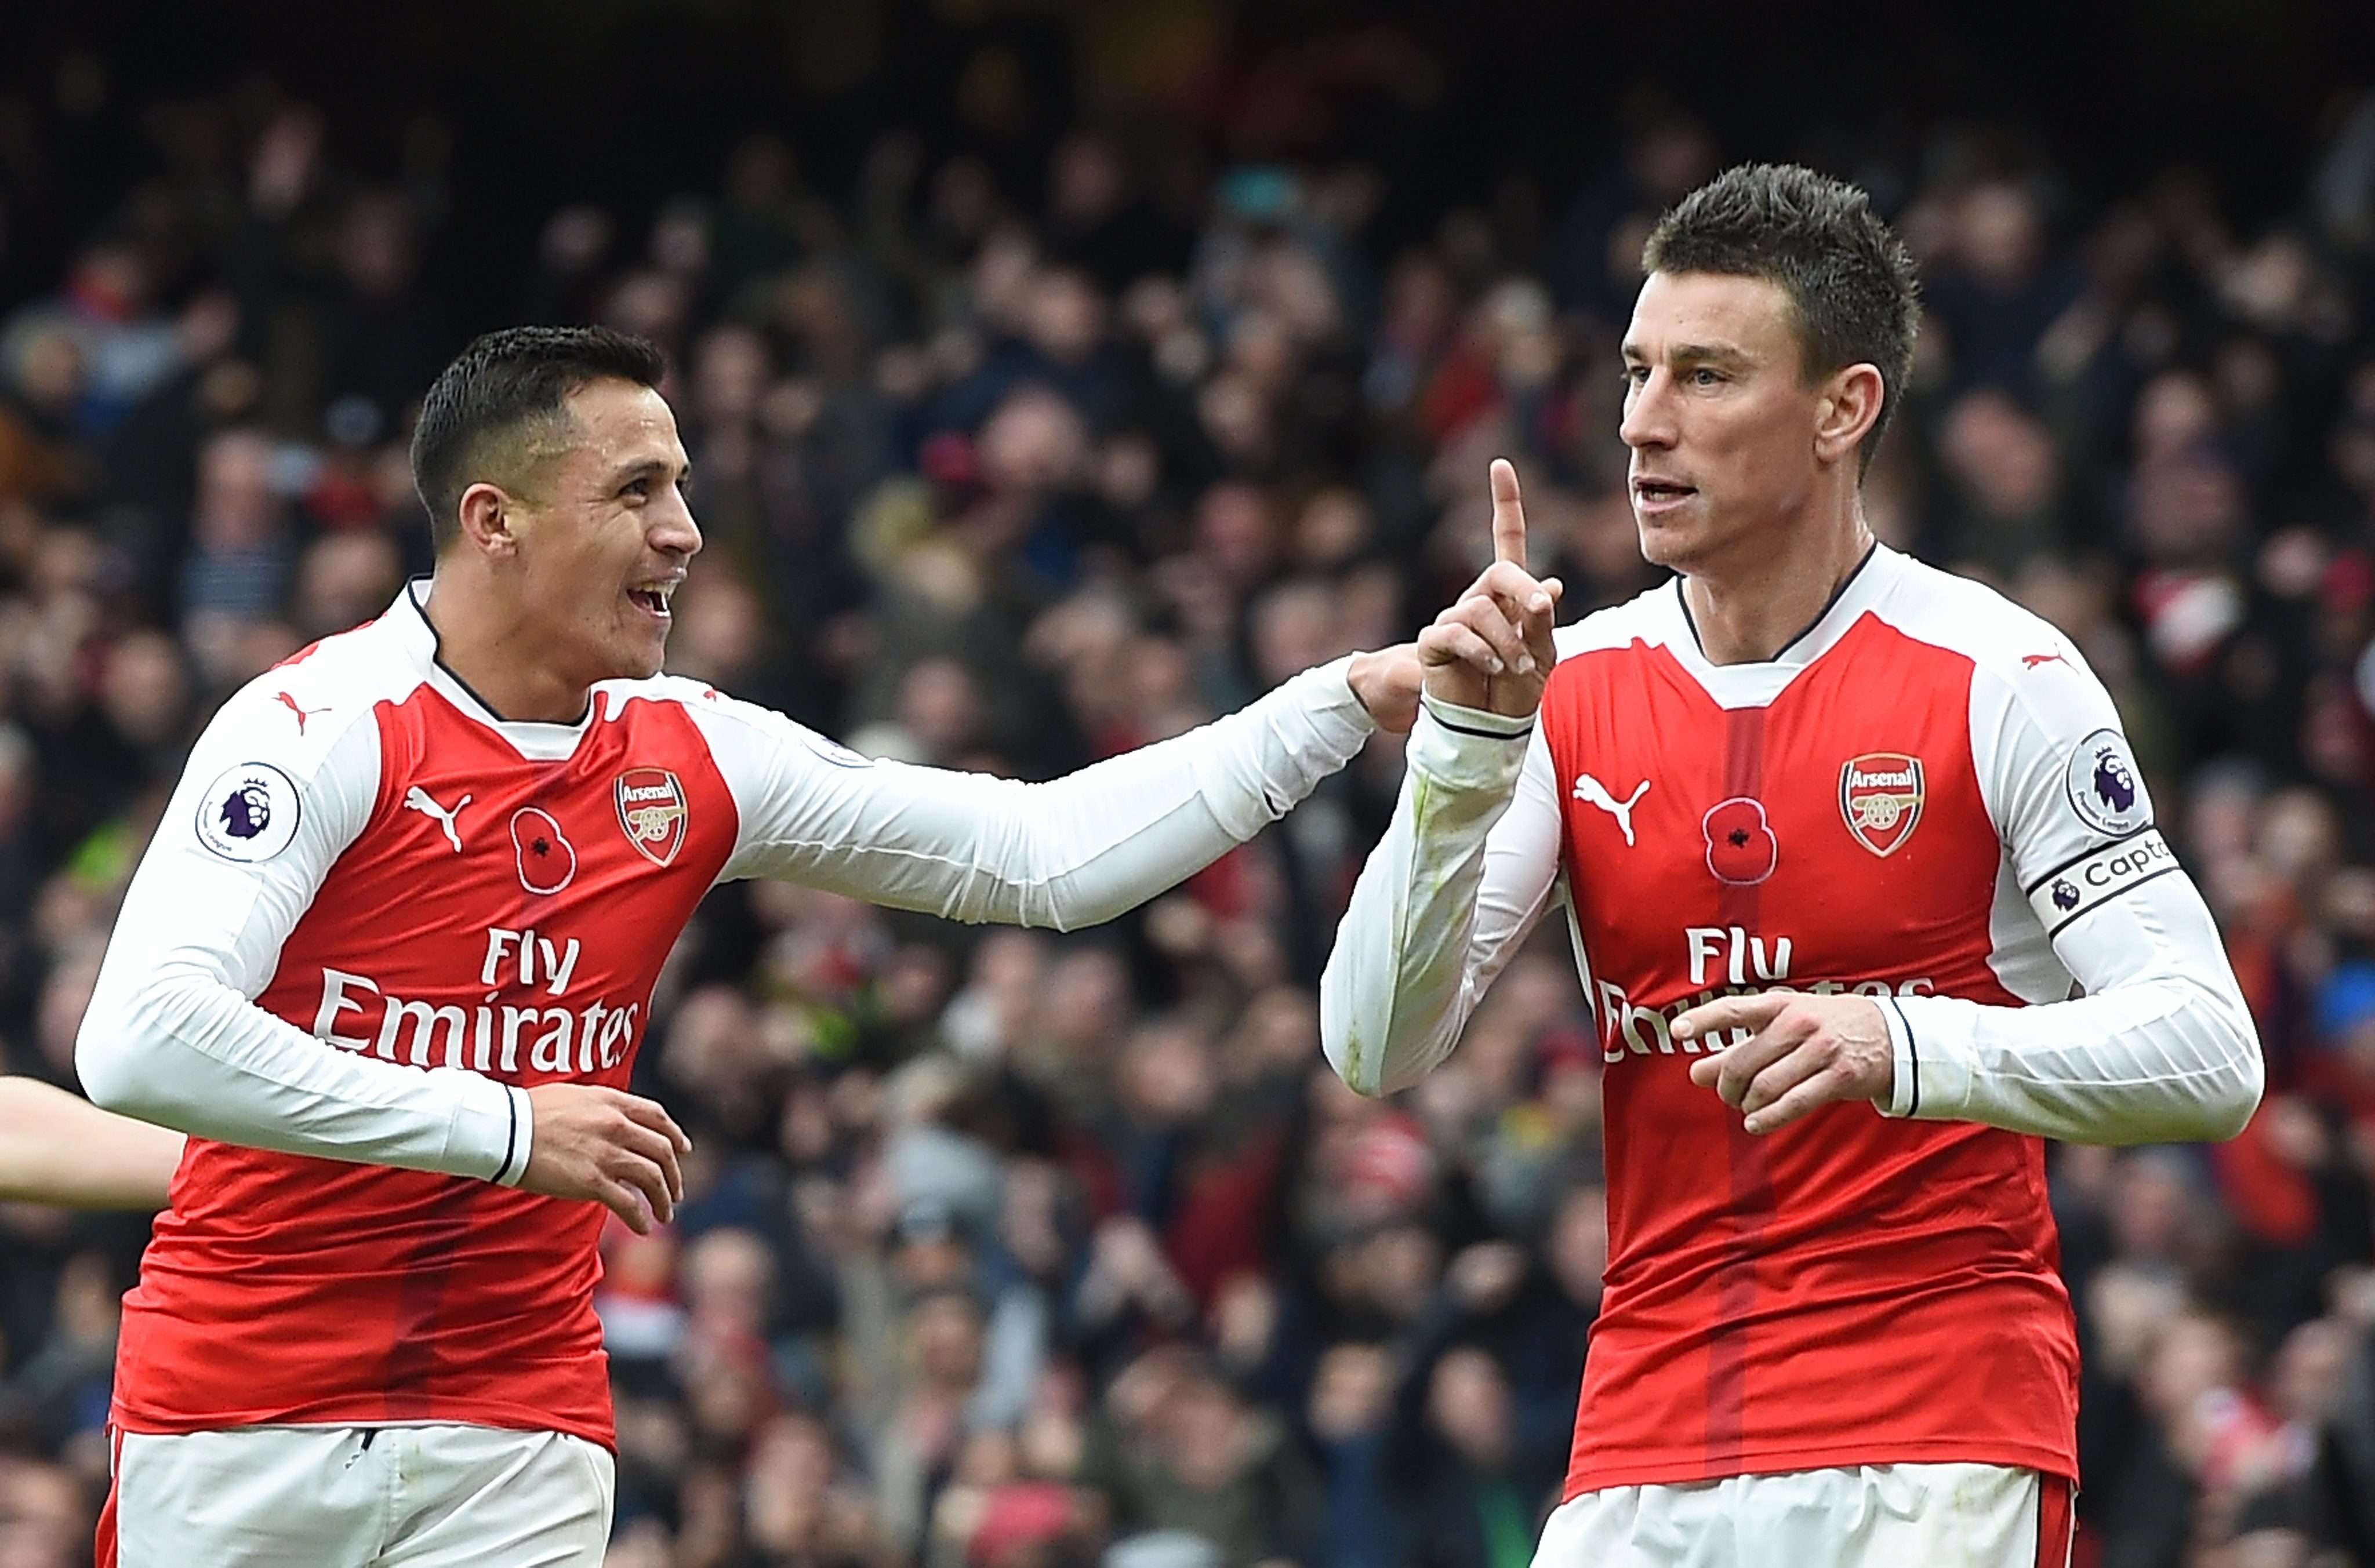 Arsenal's Laurent Koscielny (right) celebrates with Alexis Sanchez after Tottenham's Kevin Wimmer scored an own goal during their match on November 6. Photo: EPA